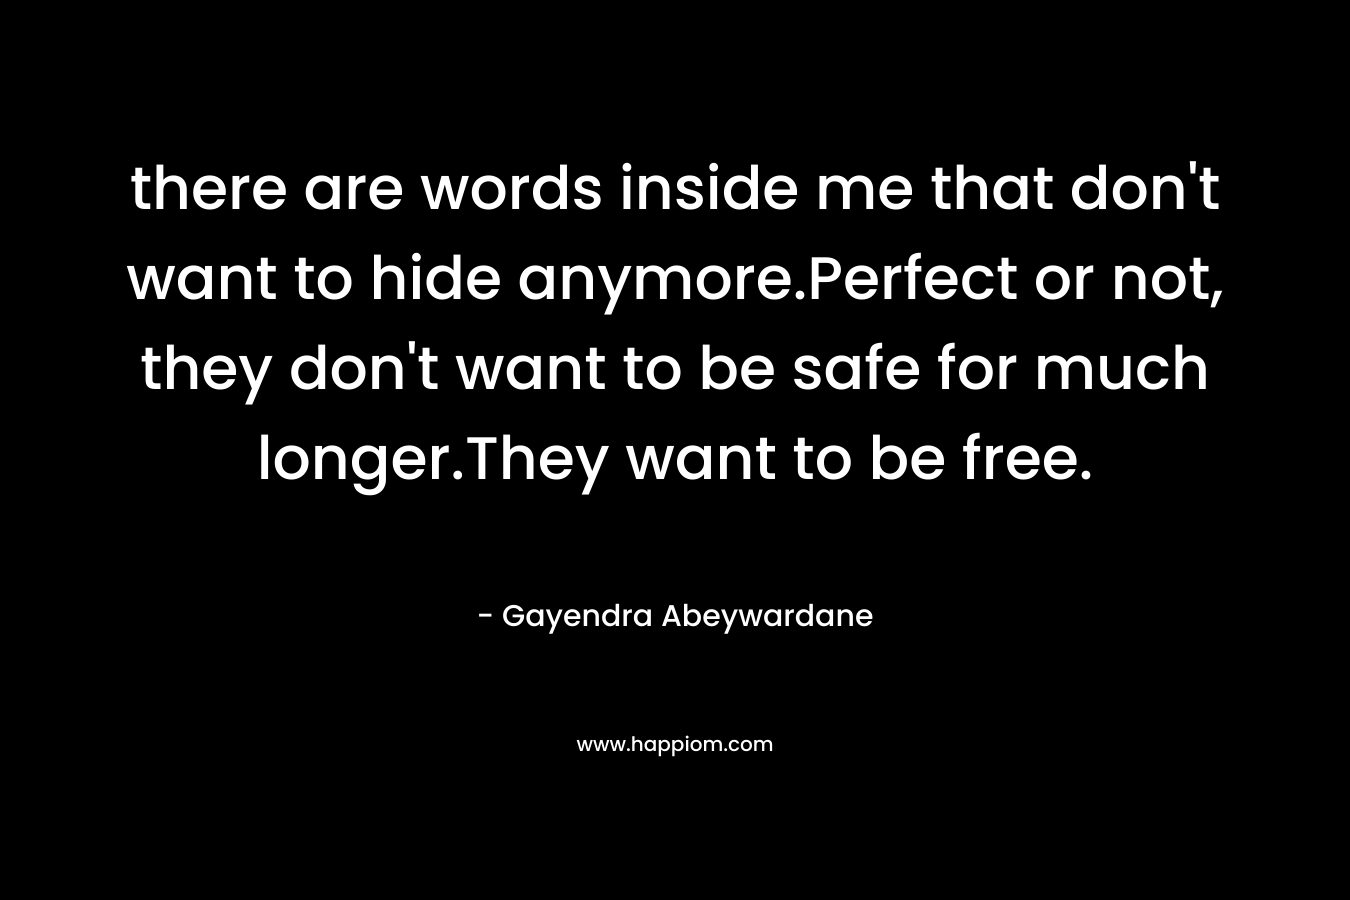 there are words inside me that don’t want to hide anymore.Perfect or not, they don’t want to be safe for much longer.They want to be free. – Gayendra Abeywardane